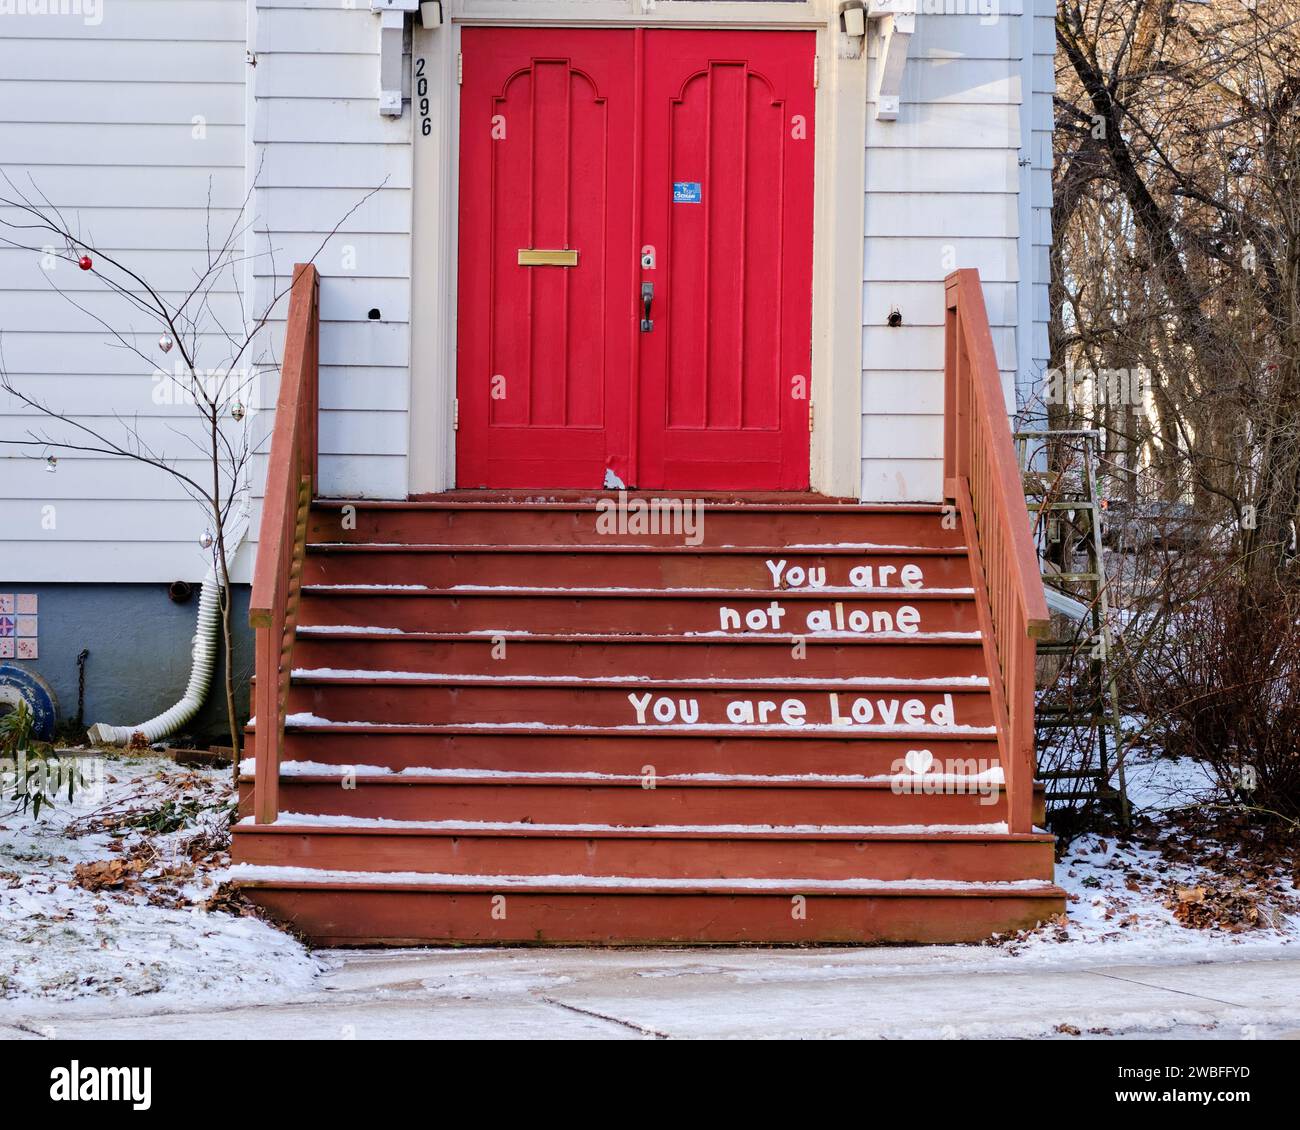 you are not alone, you are loved, sign on steps of a church Stock Photo